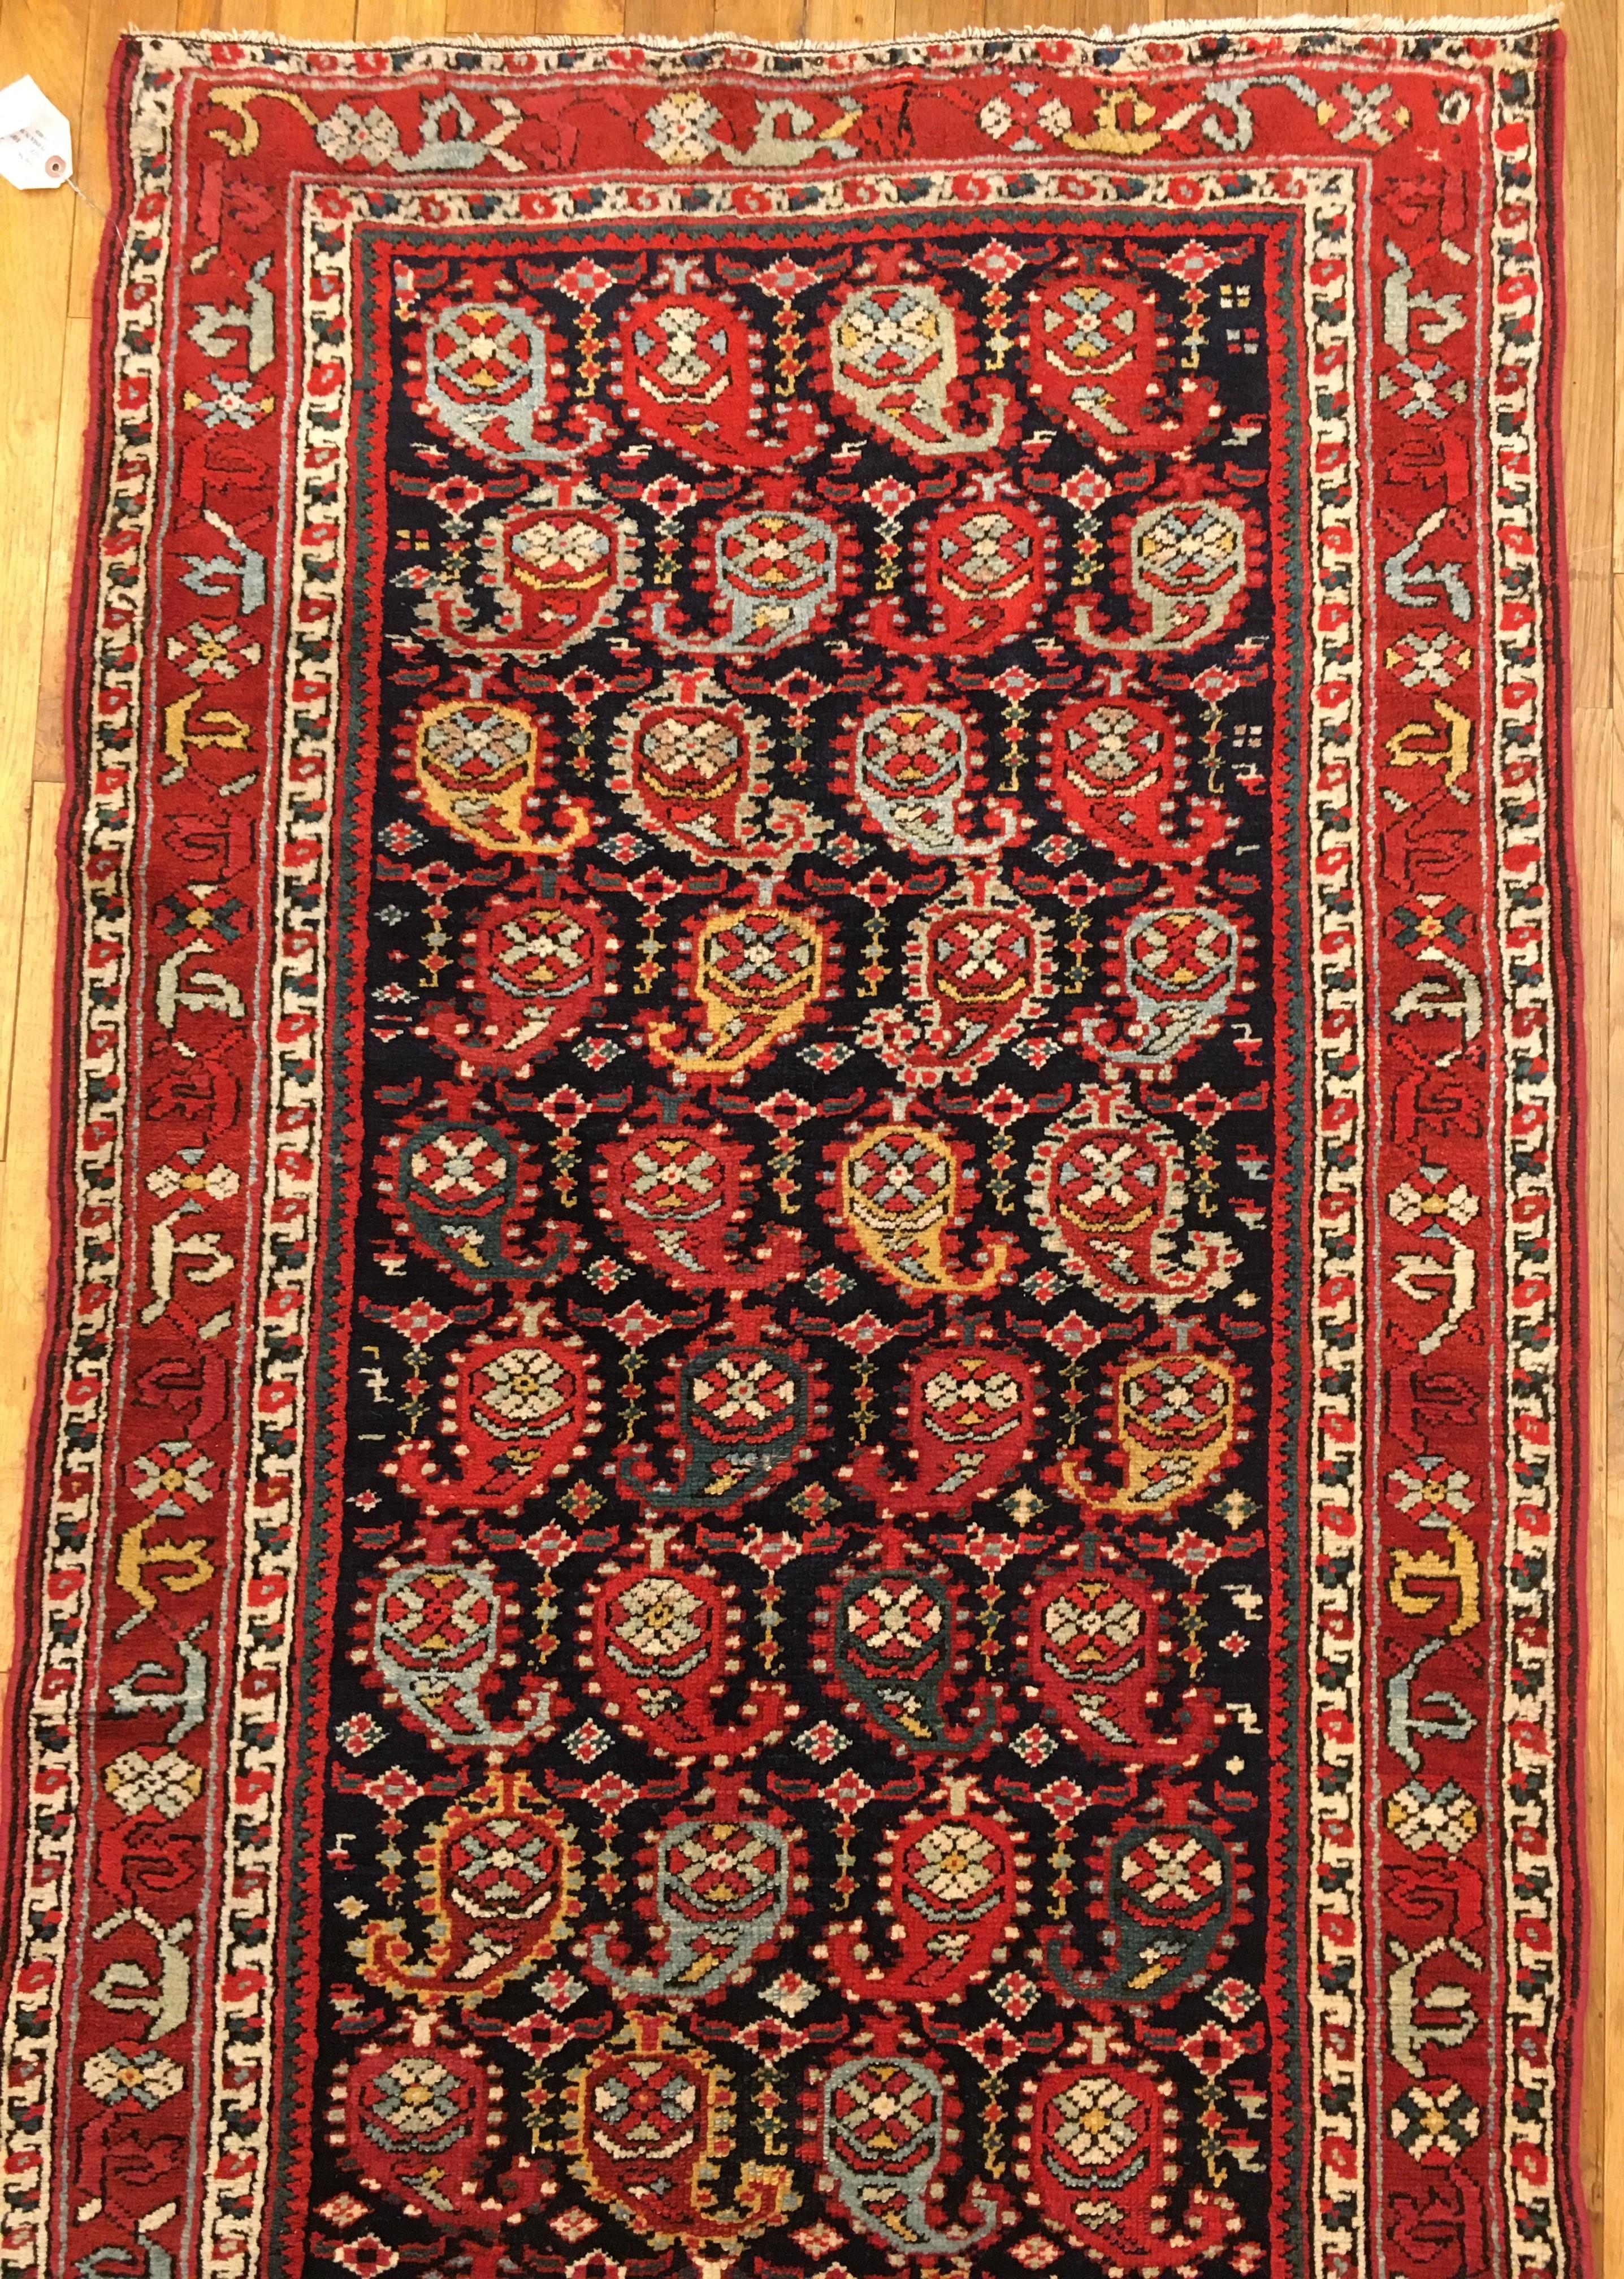 Antique Northwest Persian Oriental Rug, Runner Size, w/ Repeating Paisley Motifs In Good Condition For Sale In New York, NY